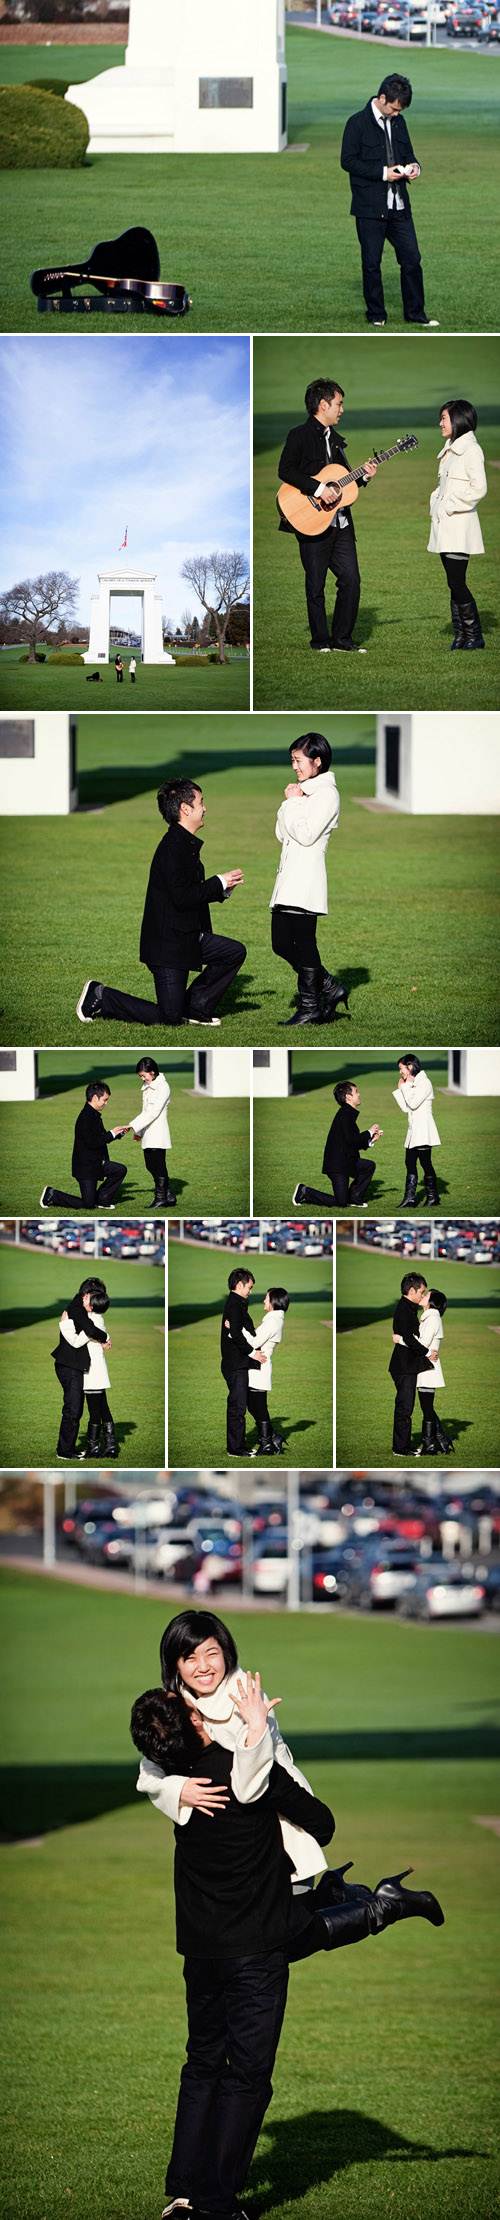 surprise proposal and engagement party, images by GH Kim Photography